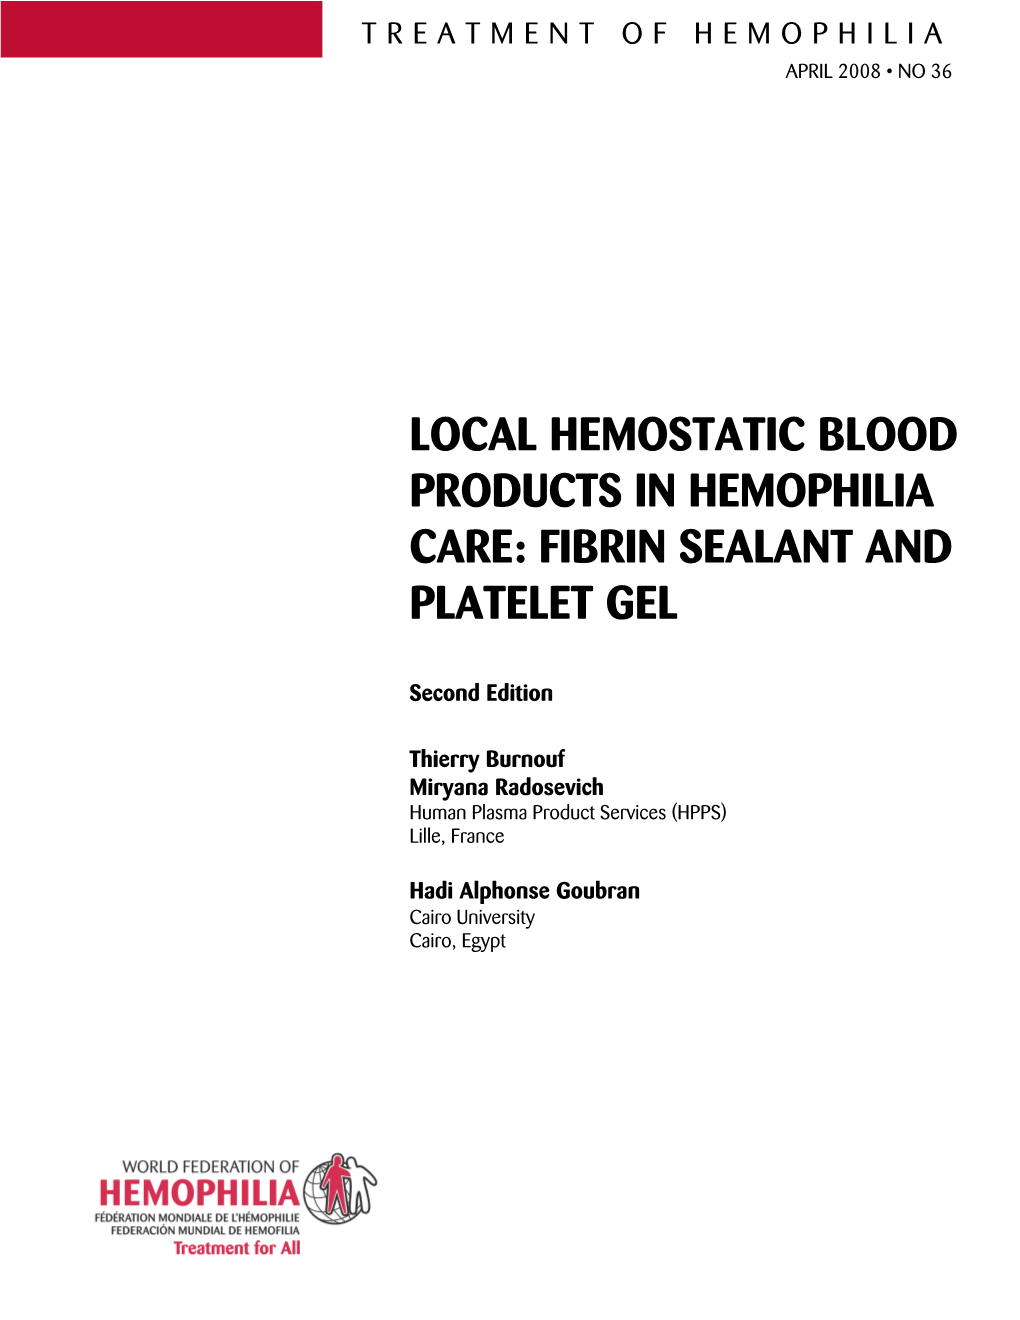 Local Hemostatic Blood Products in Hemophilia Care: Fibrin Sealant and Platelet Gel